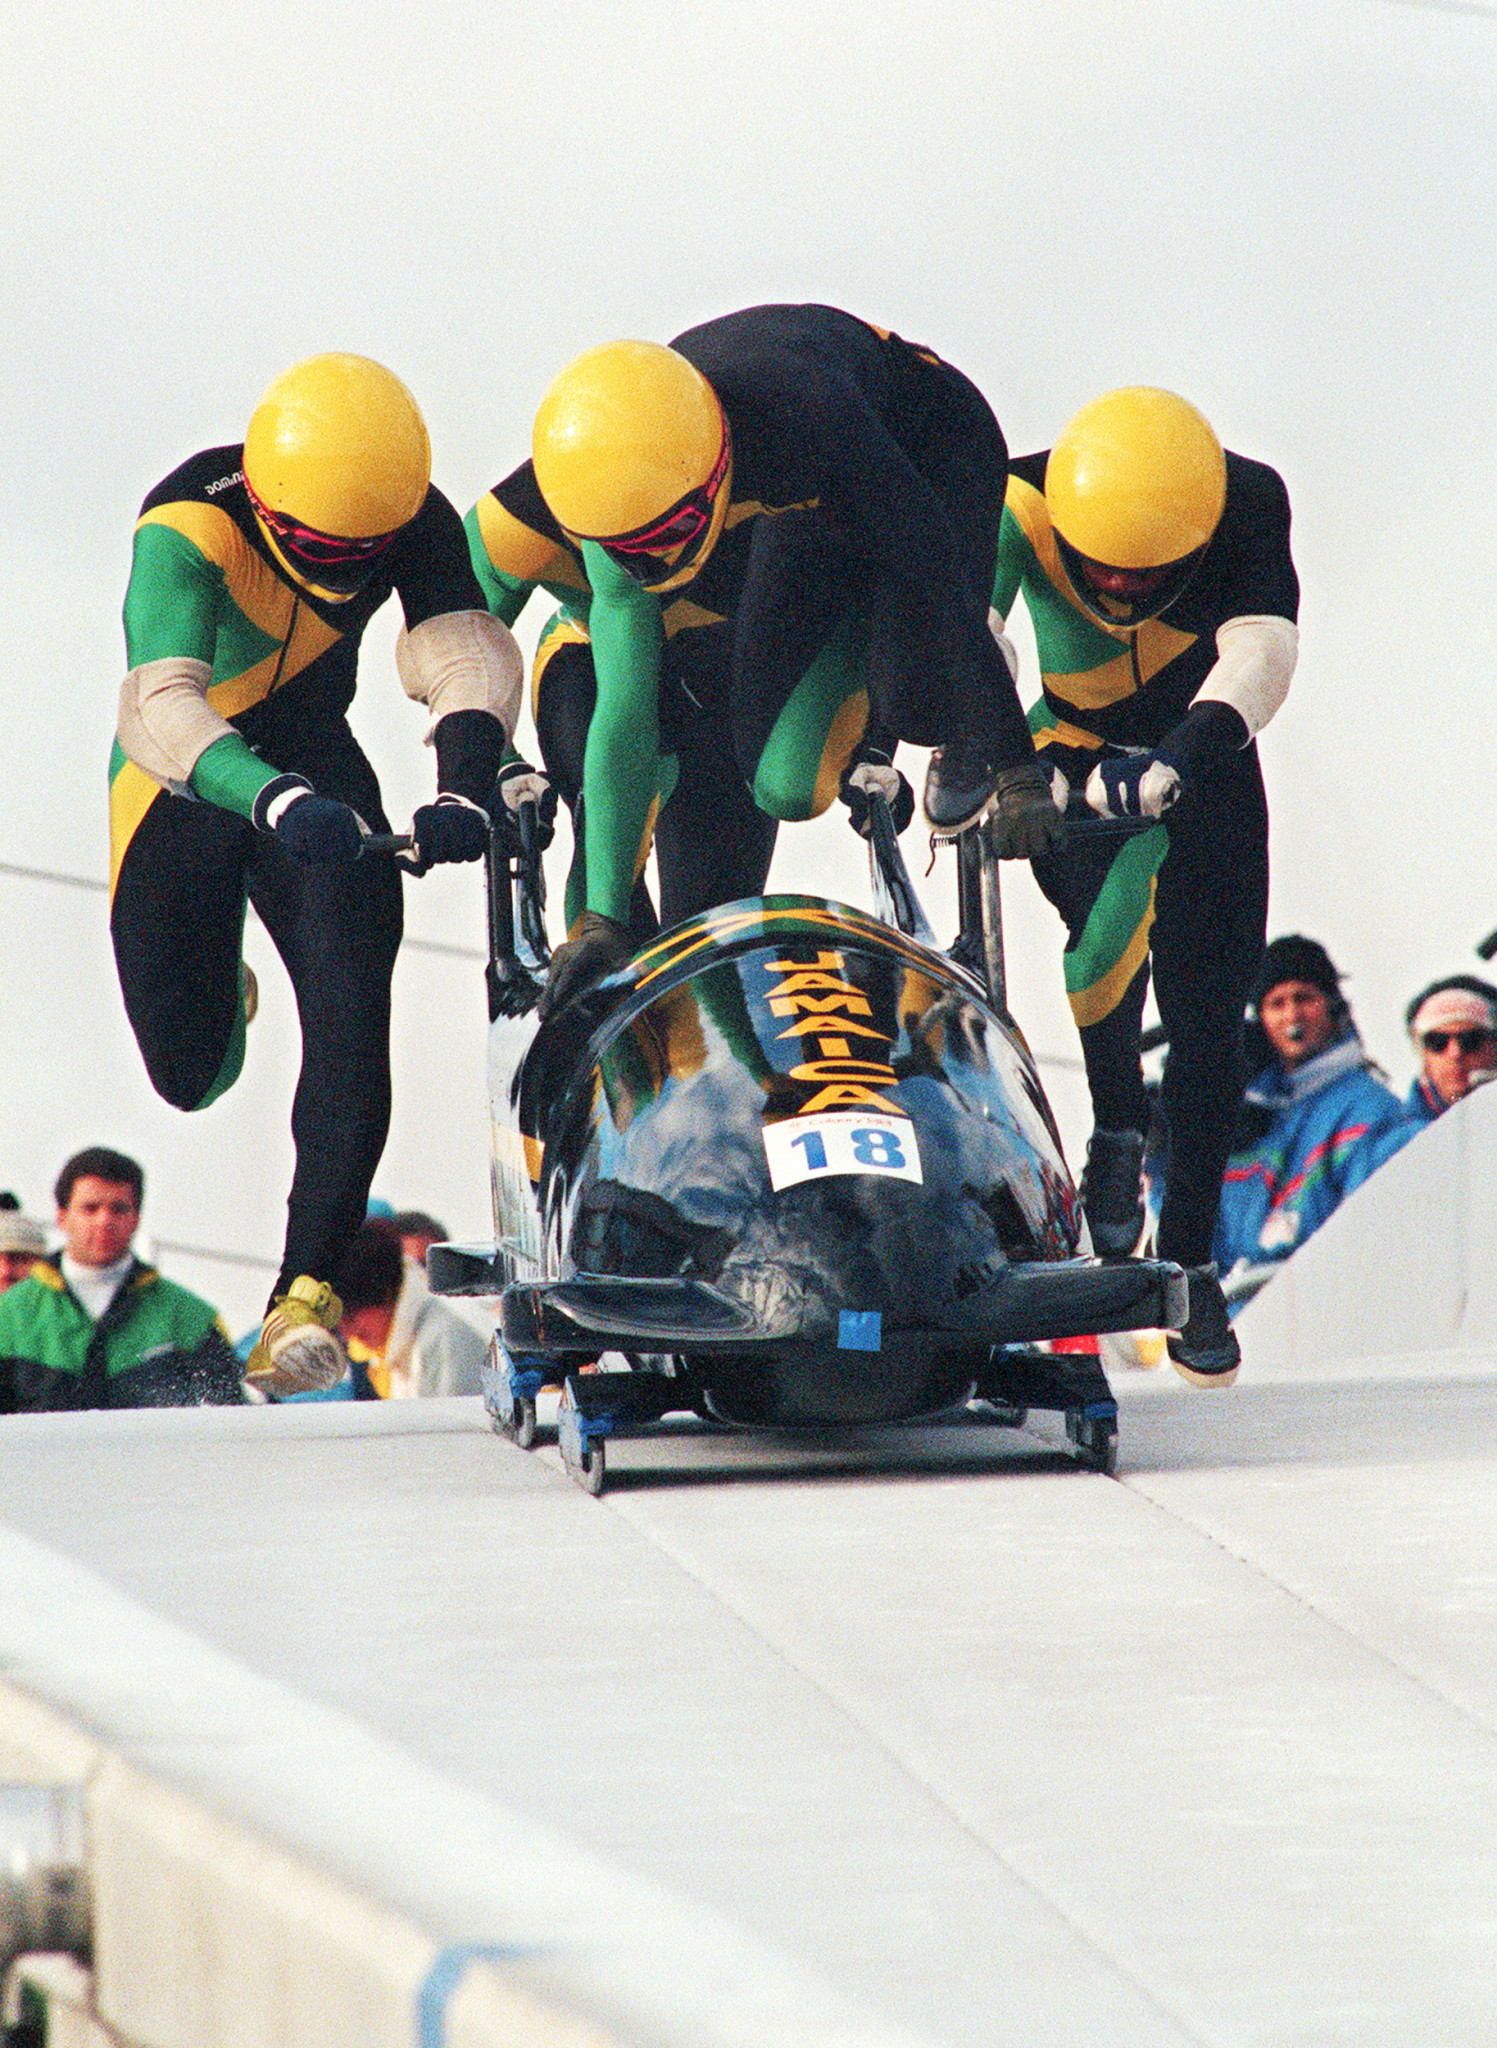 Jamaica made headlines in 1988 when they made their debut in bobsleigh at the Olympics ©Getty Images